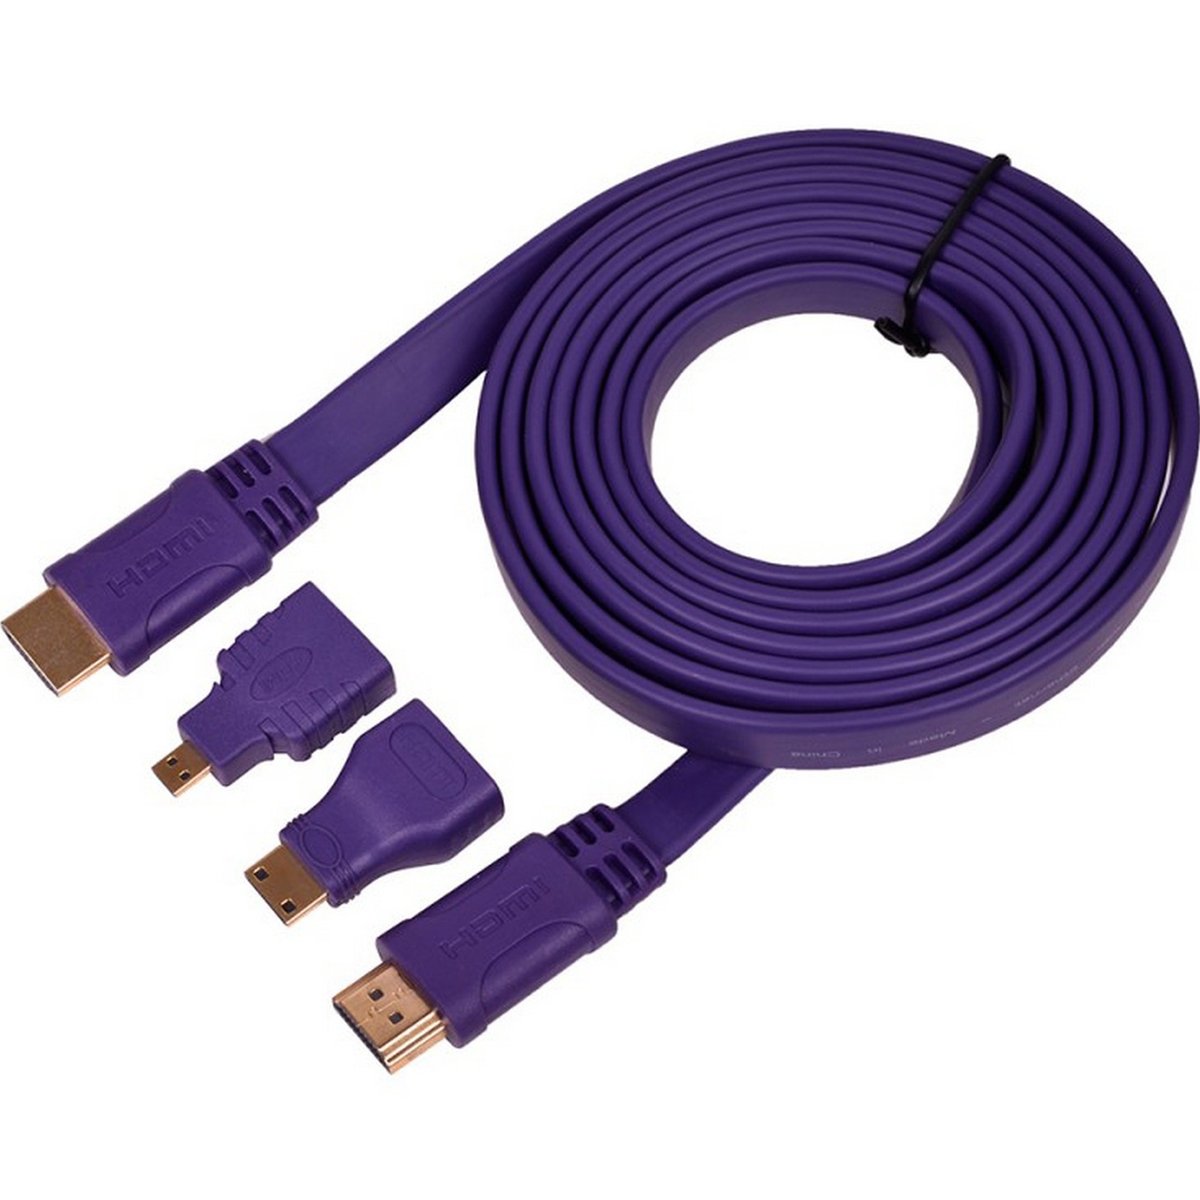 Trands 3in1 HDMI Cable 9995